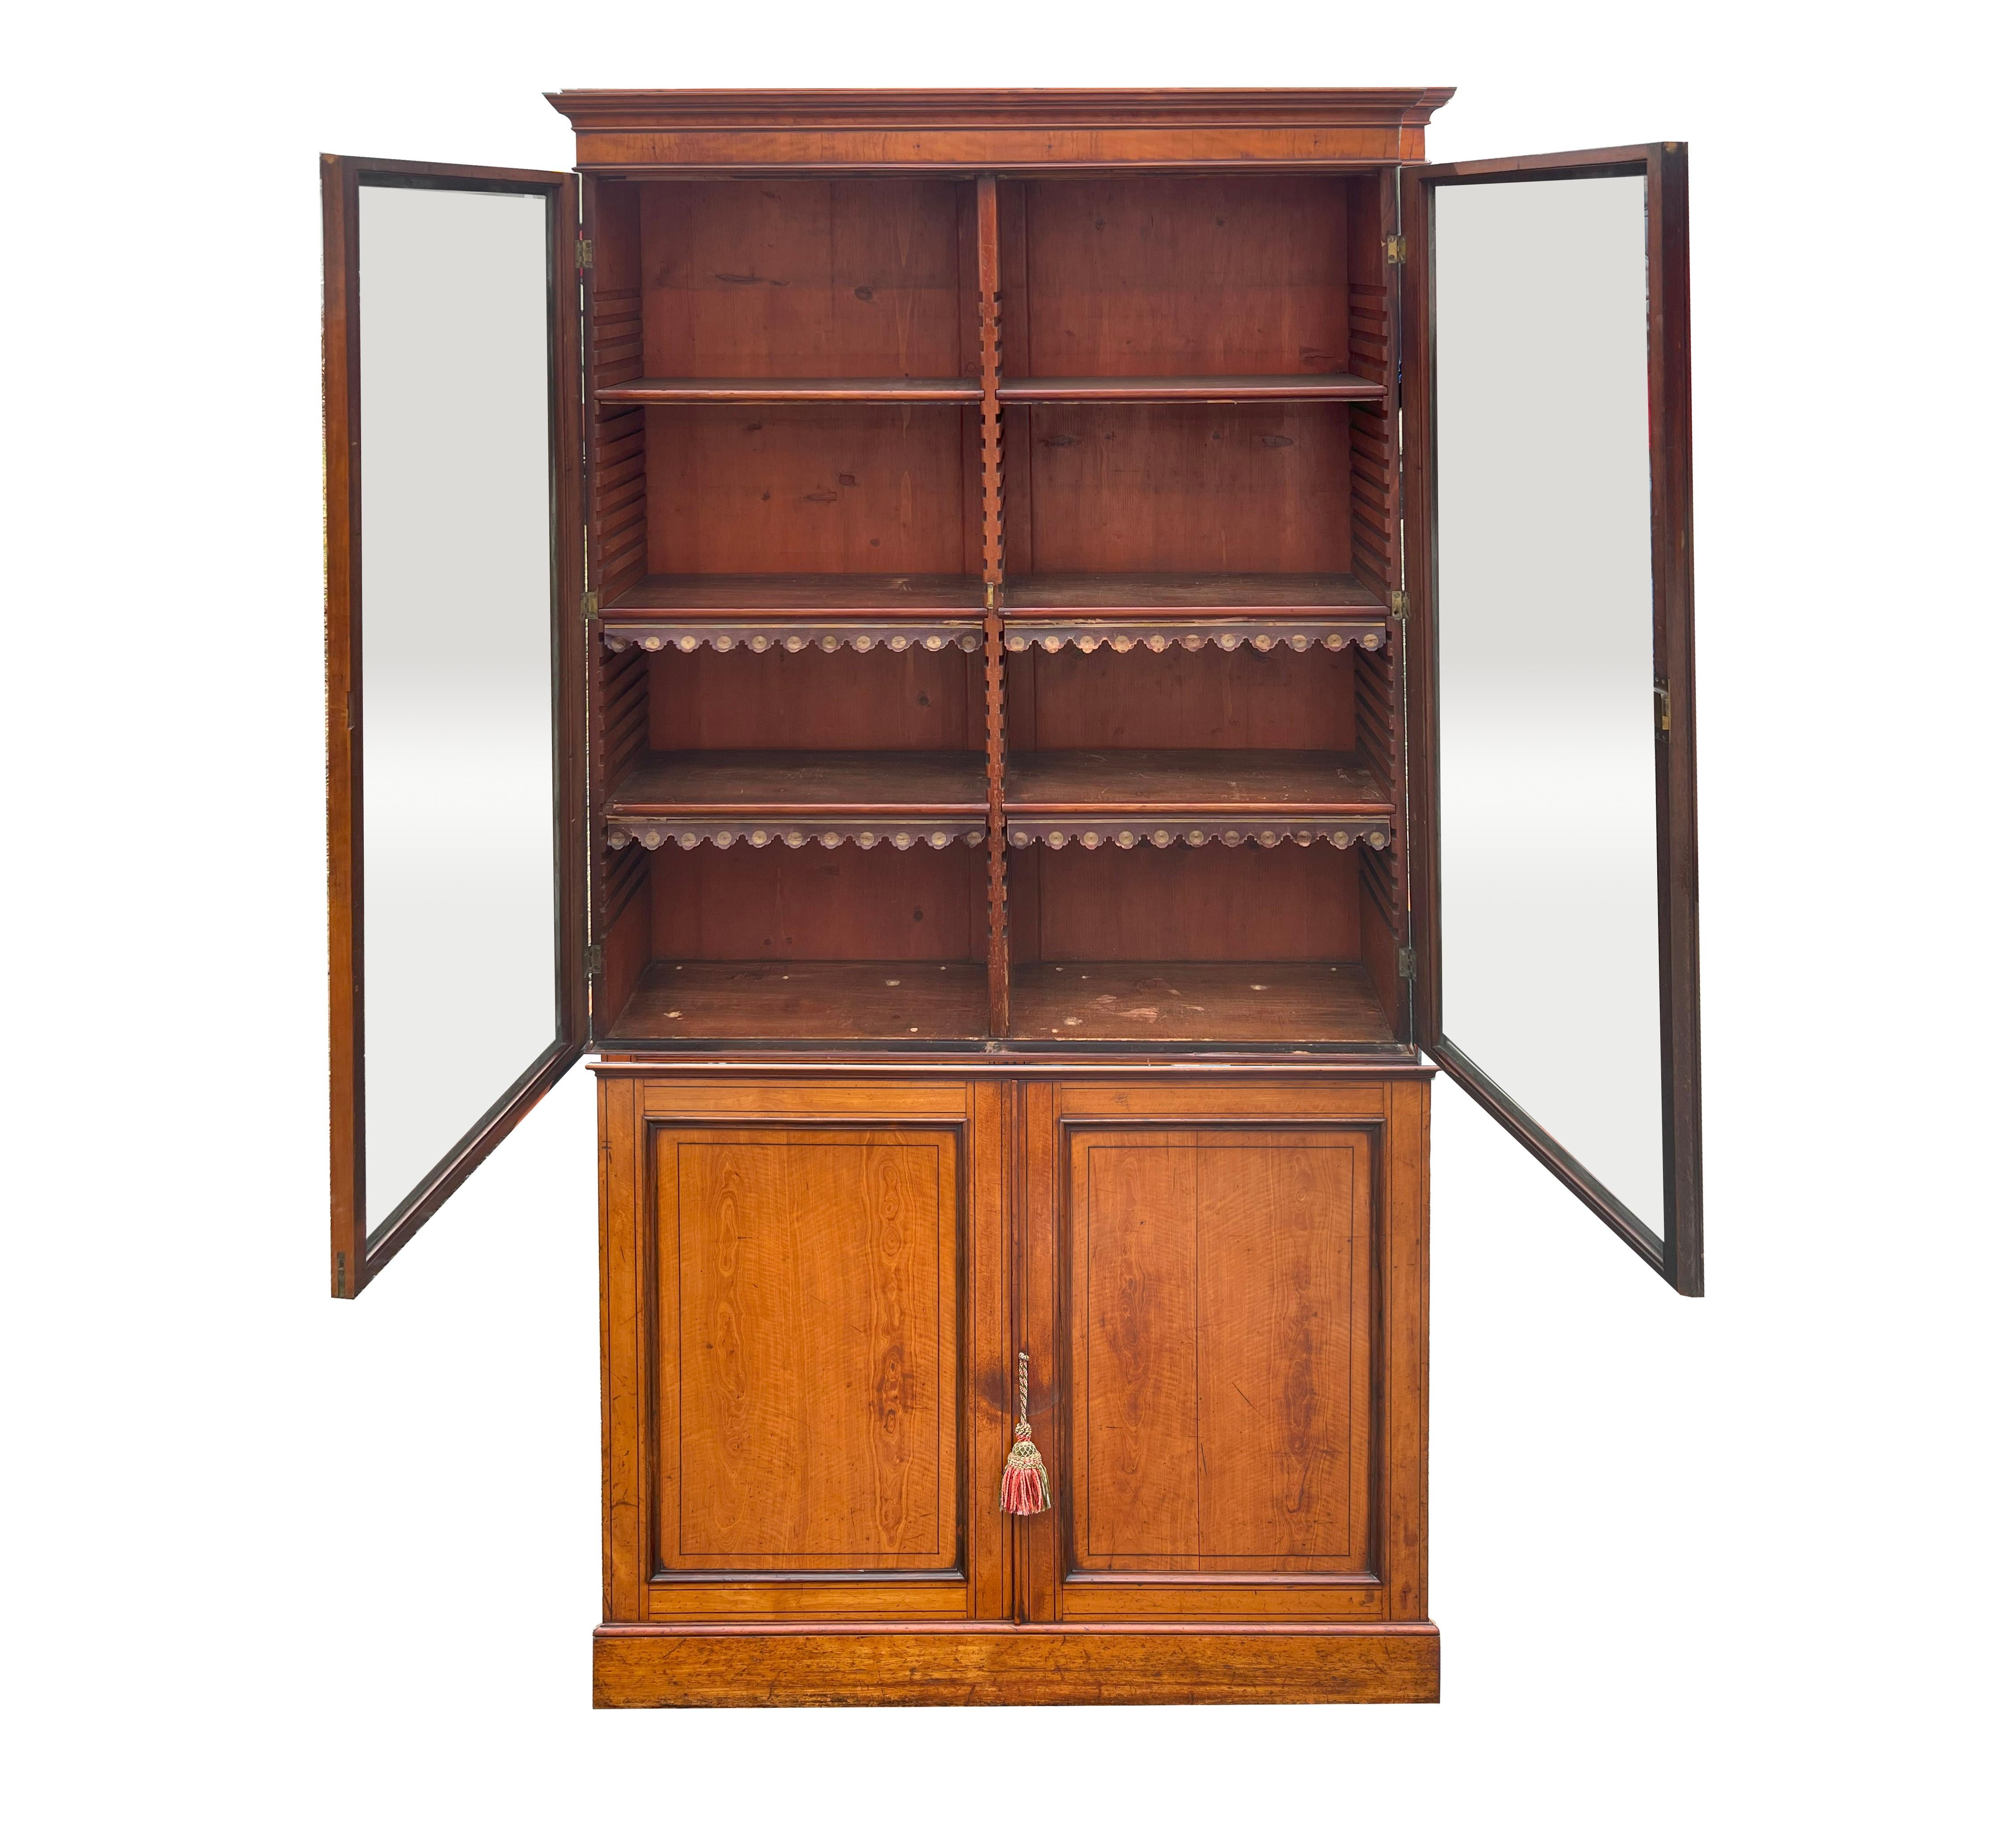 With rectangular shaped cornice over a pair of glass doors enclosing three shelves. The lower section with a pair of cabinet doors enclosing two shelves. Plinth base. With Key.